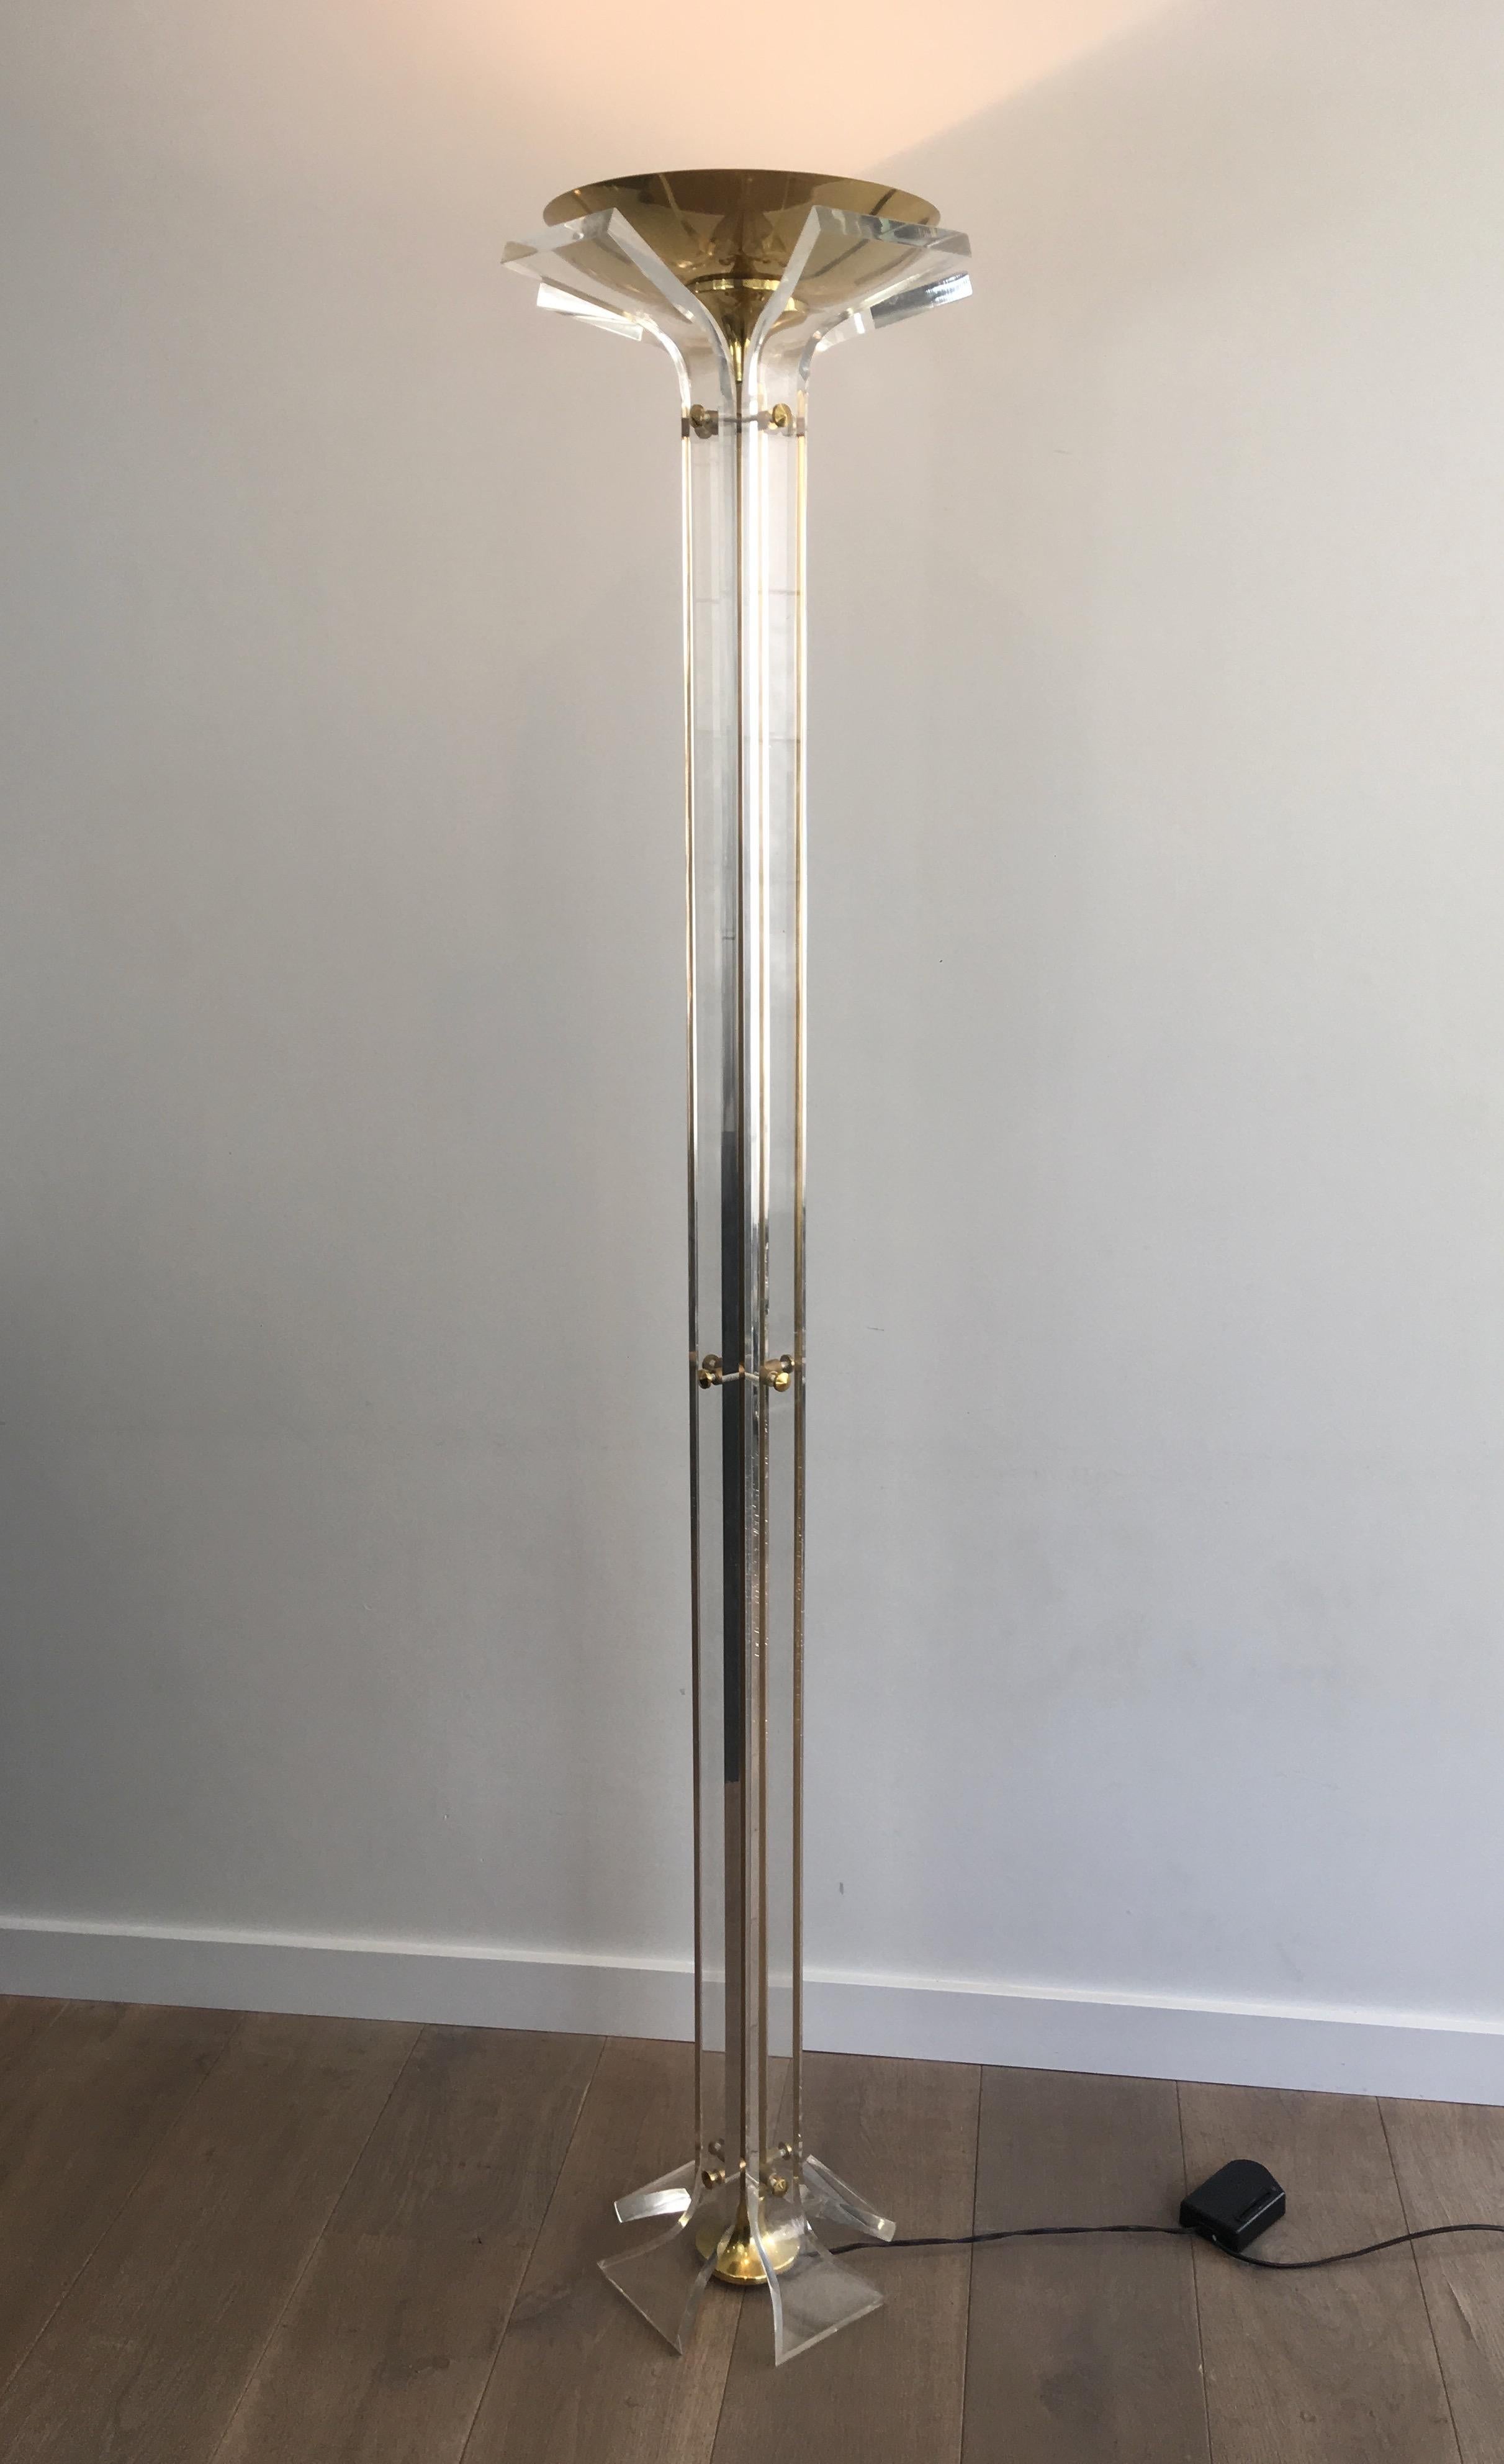 This rare and very nice floor lamp is made of Lucite and gilt brass. This is an Italian work, in the style of famous designer Romeo Rega, circa 1970.